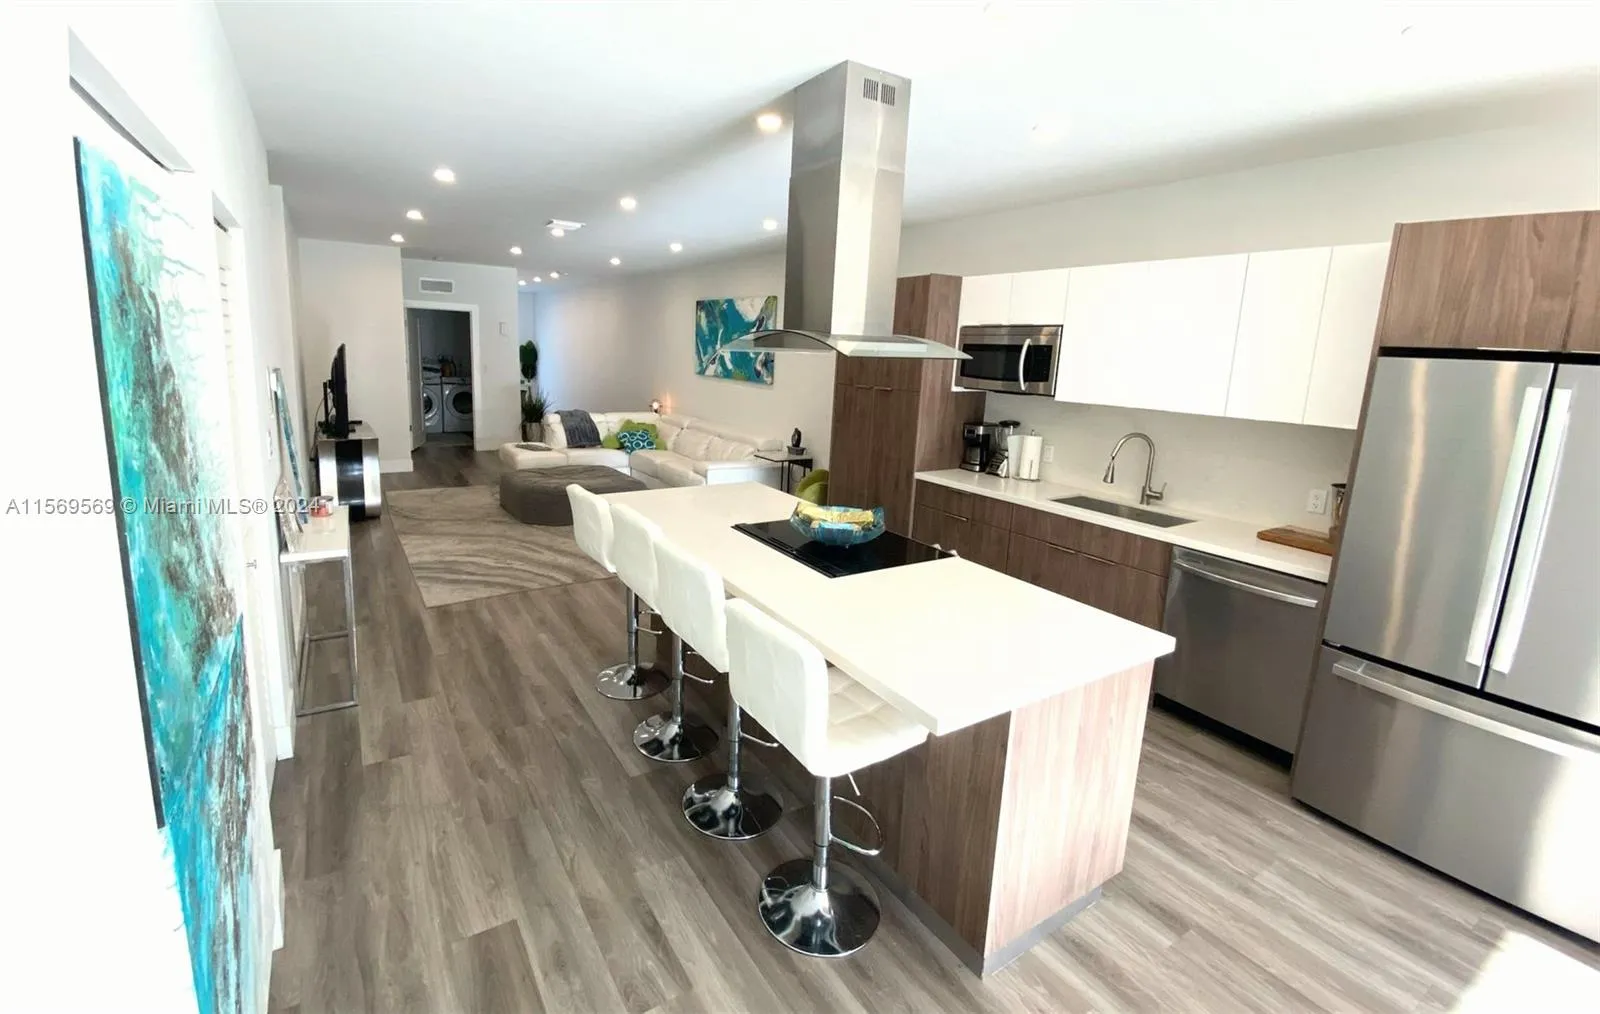 Gourmet Kitchen with large kitchen island, stainless steel appliances